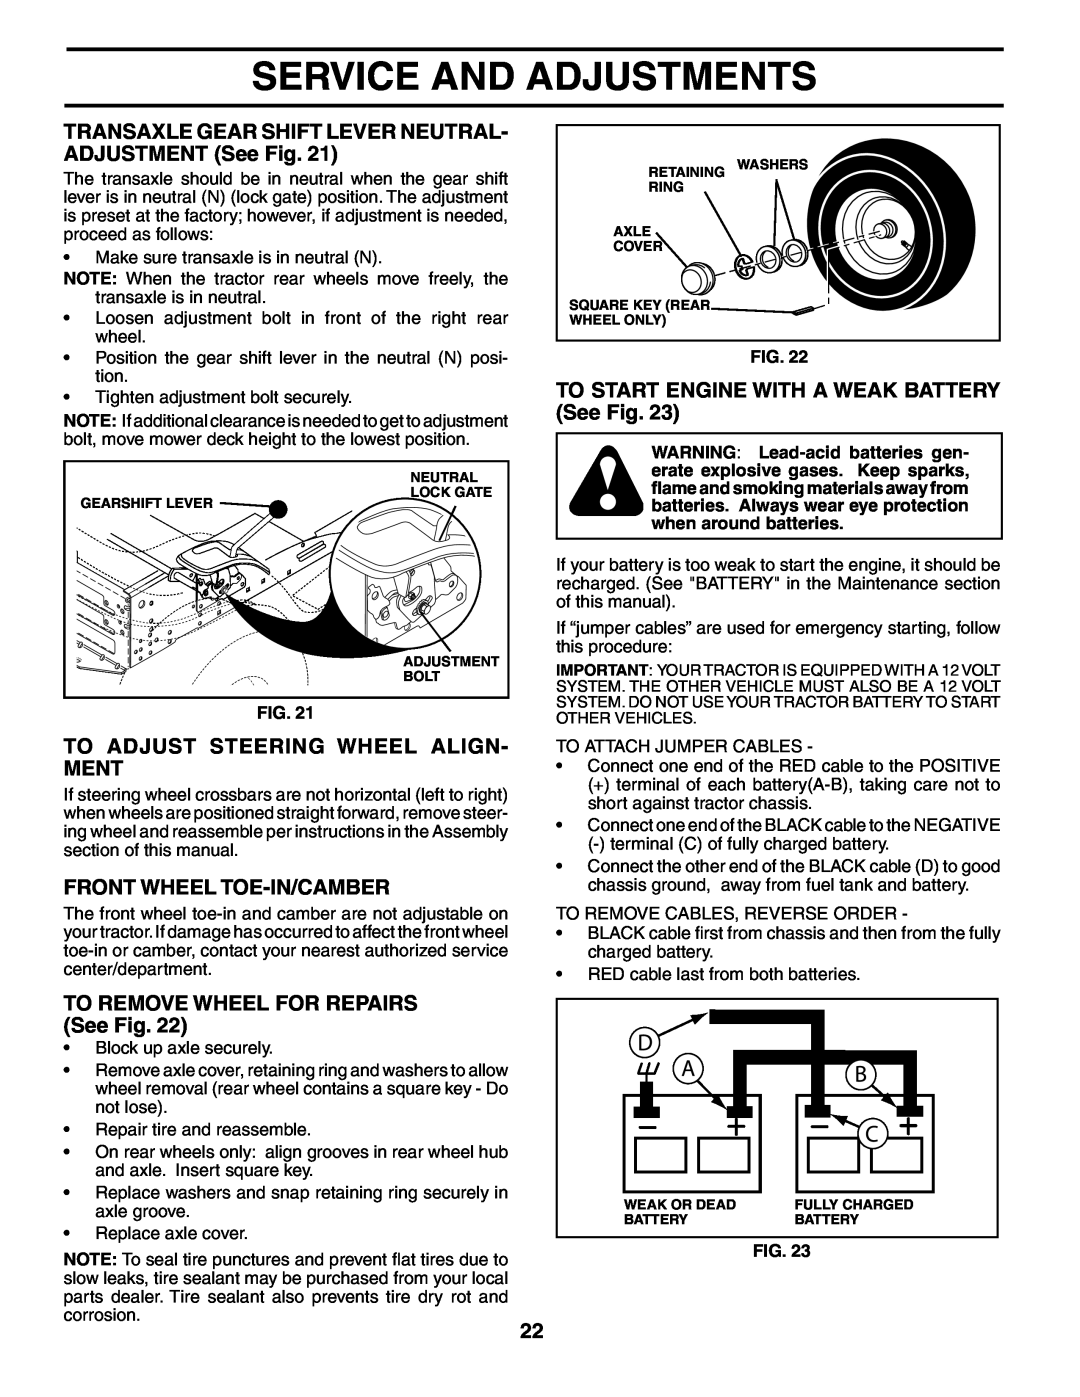 Poulan PB1638LT manual To Adjust Steering Wheel Align- Ment, Front Wheel Toe-In/Camber, TO REMOVE WHEEL FOR REPAIRS See Fig 